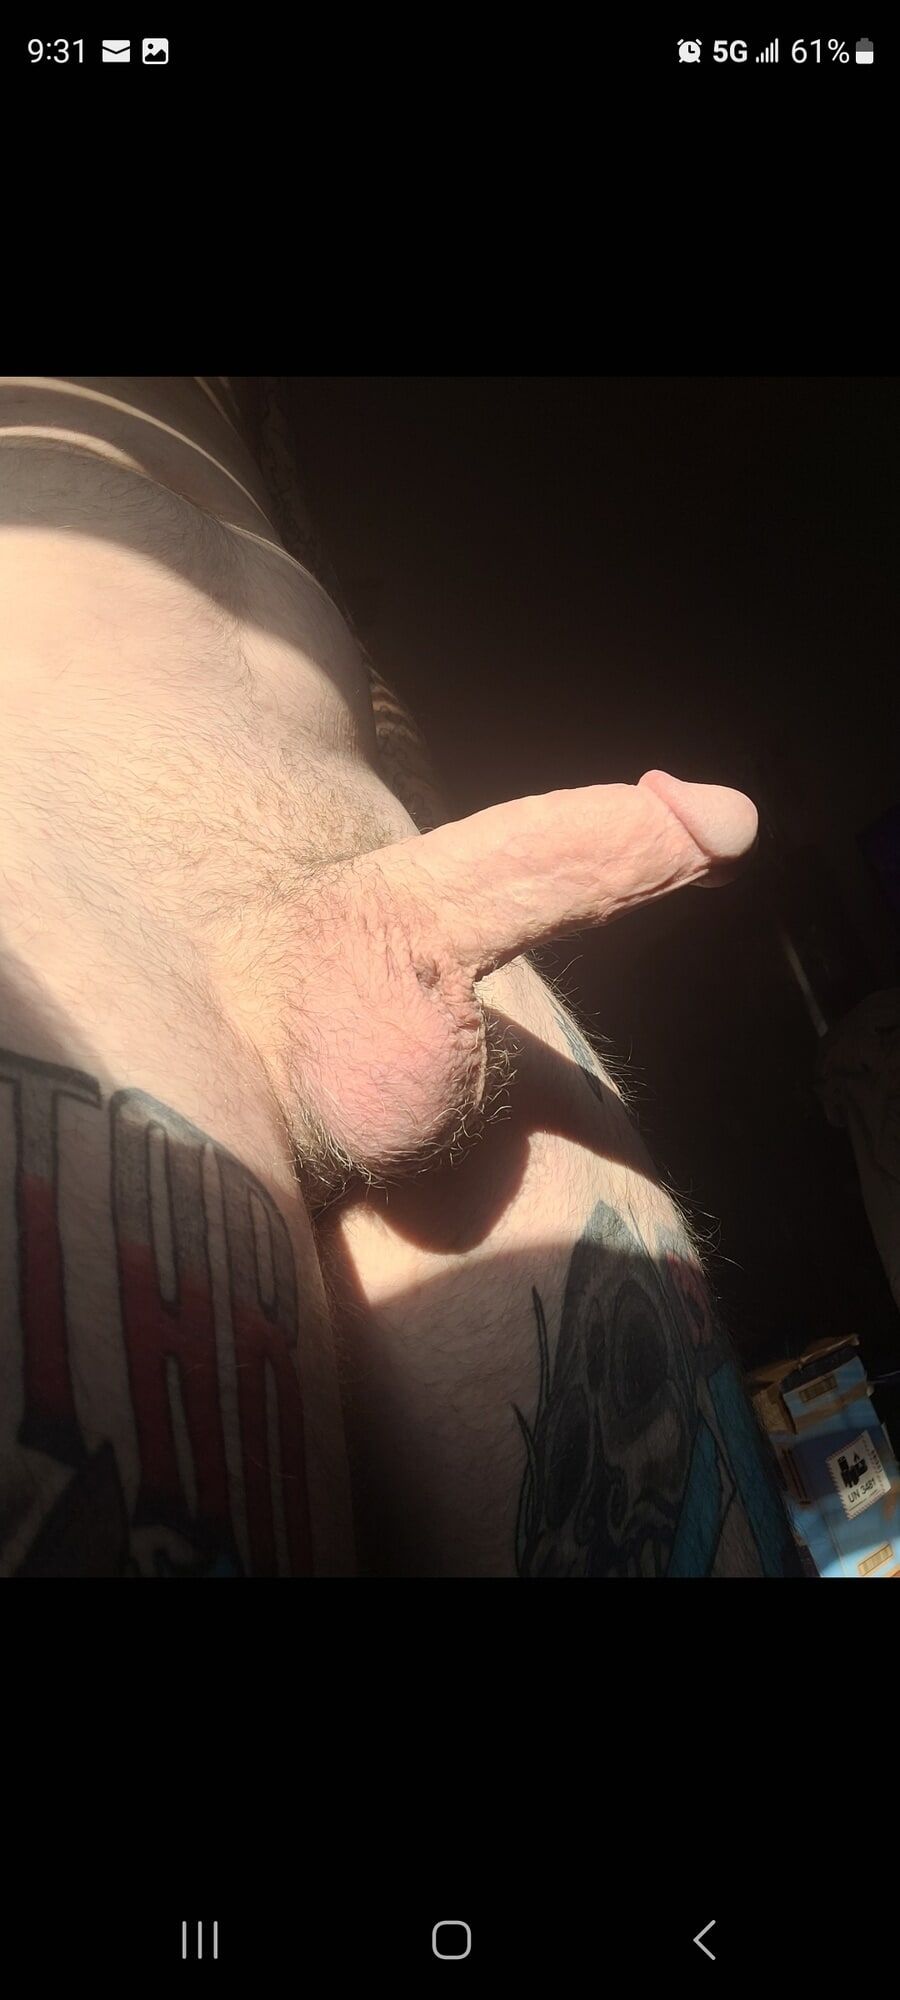 So much cock #15